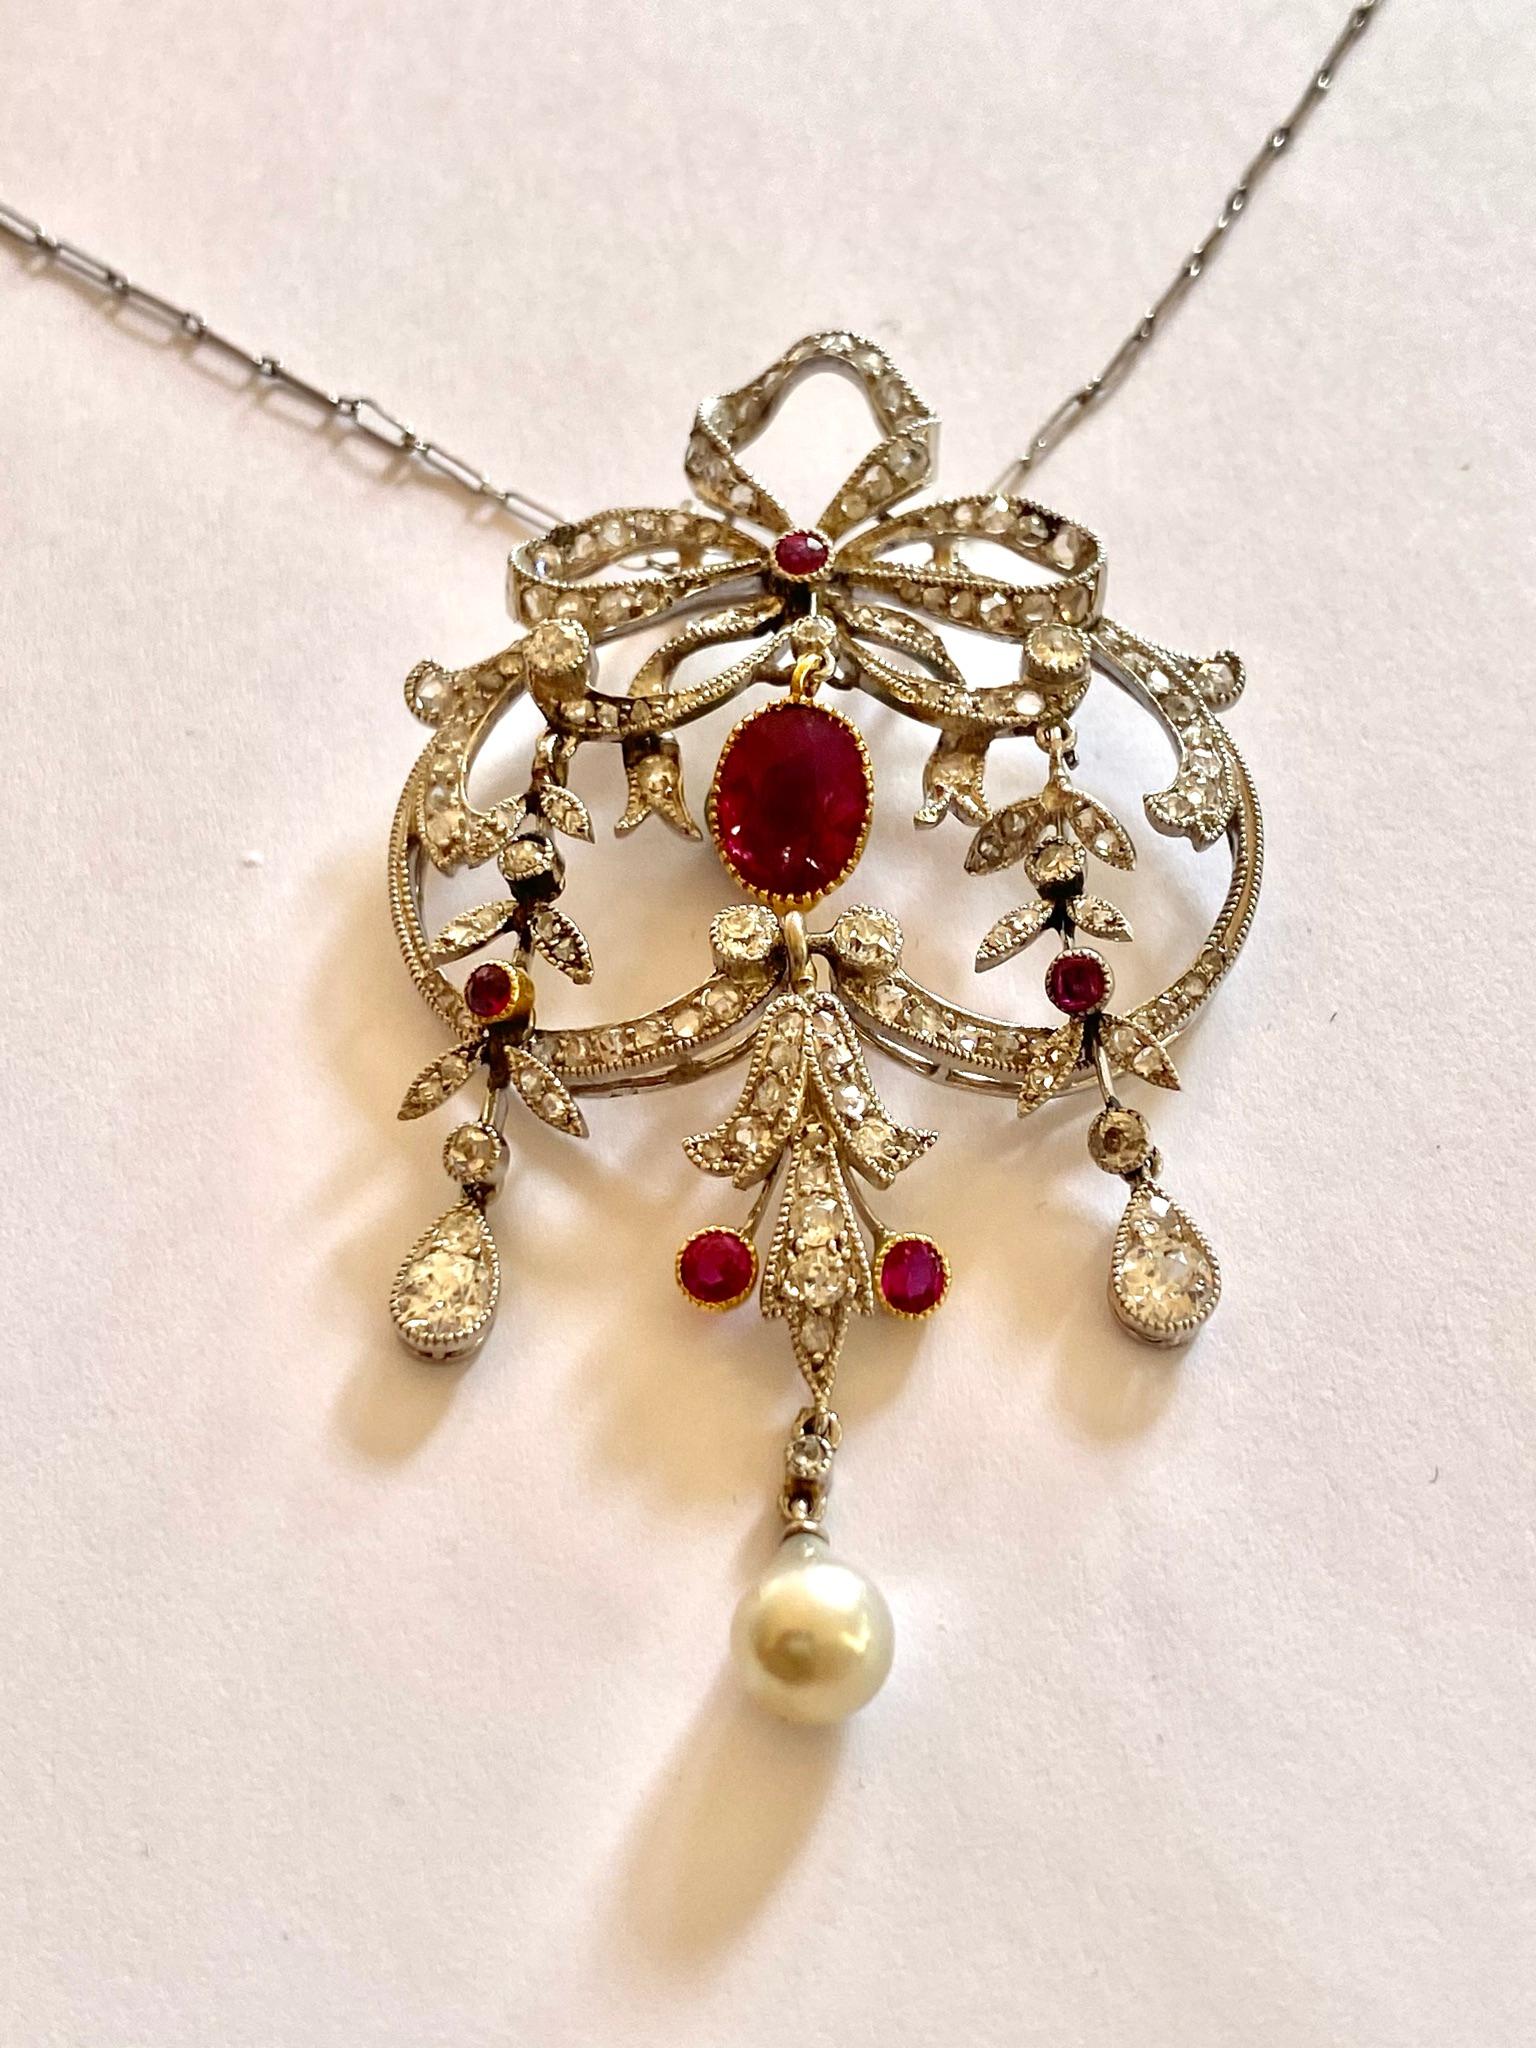 One (1) Platinum and Yellow gold brooch - pendant with chain.
equipped with French hallmarks from ca 1910 for Platinum and Gold.
occupied with:
One (1) oval mix cut Ruby of 1.40 ct. Origin: Burma and untreated size: 7.3 x 5.7 x 3.6 mm
Five (5) round